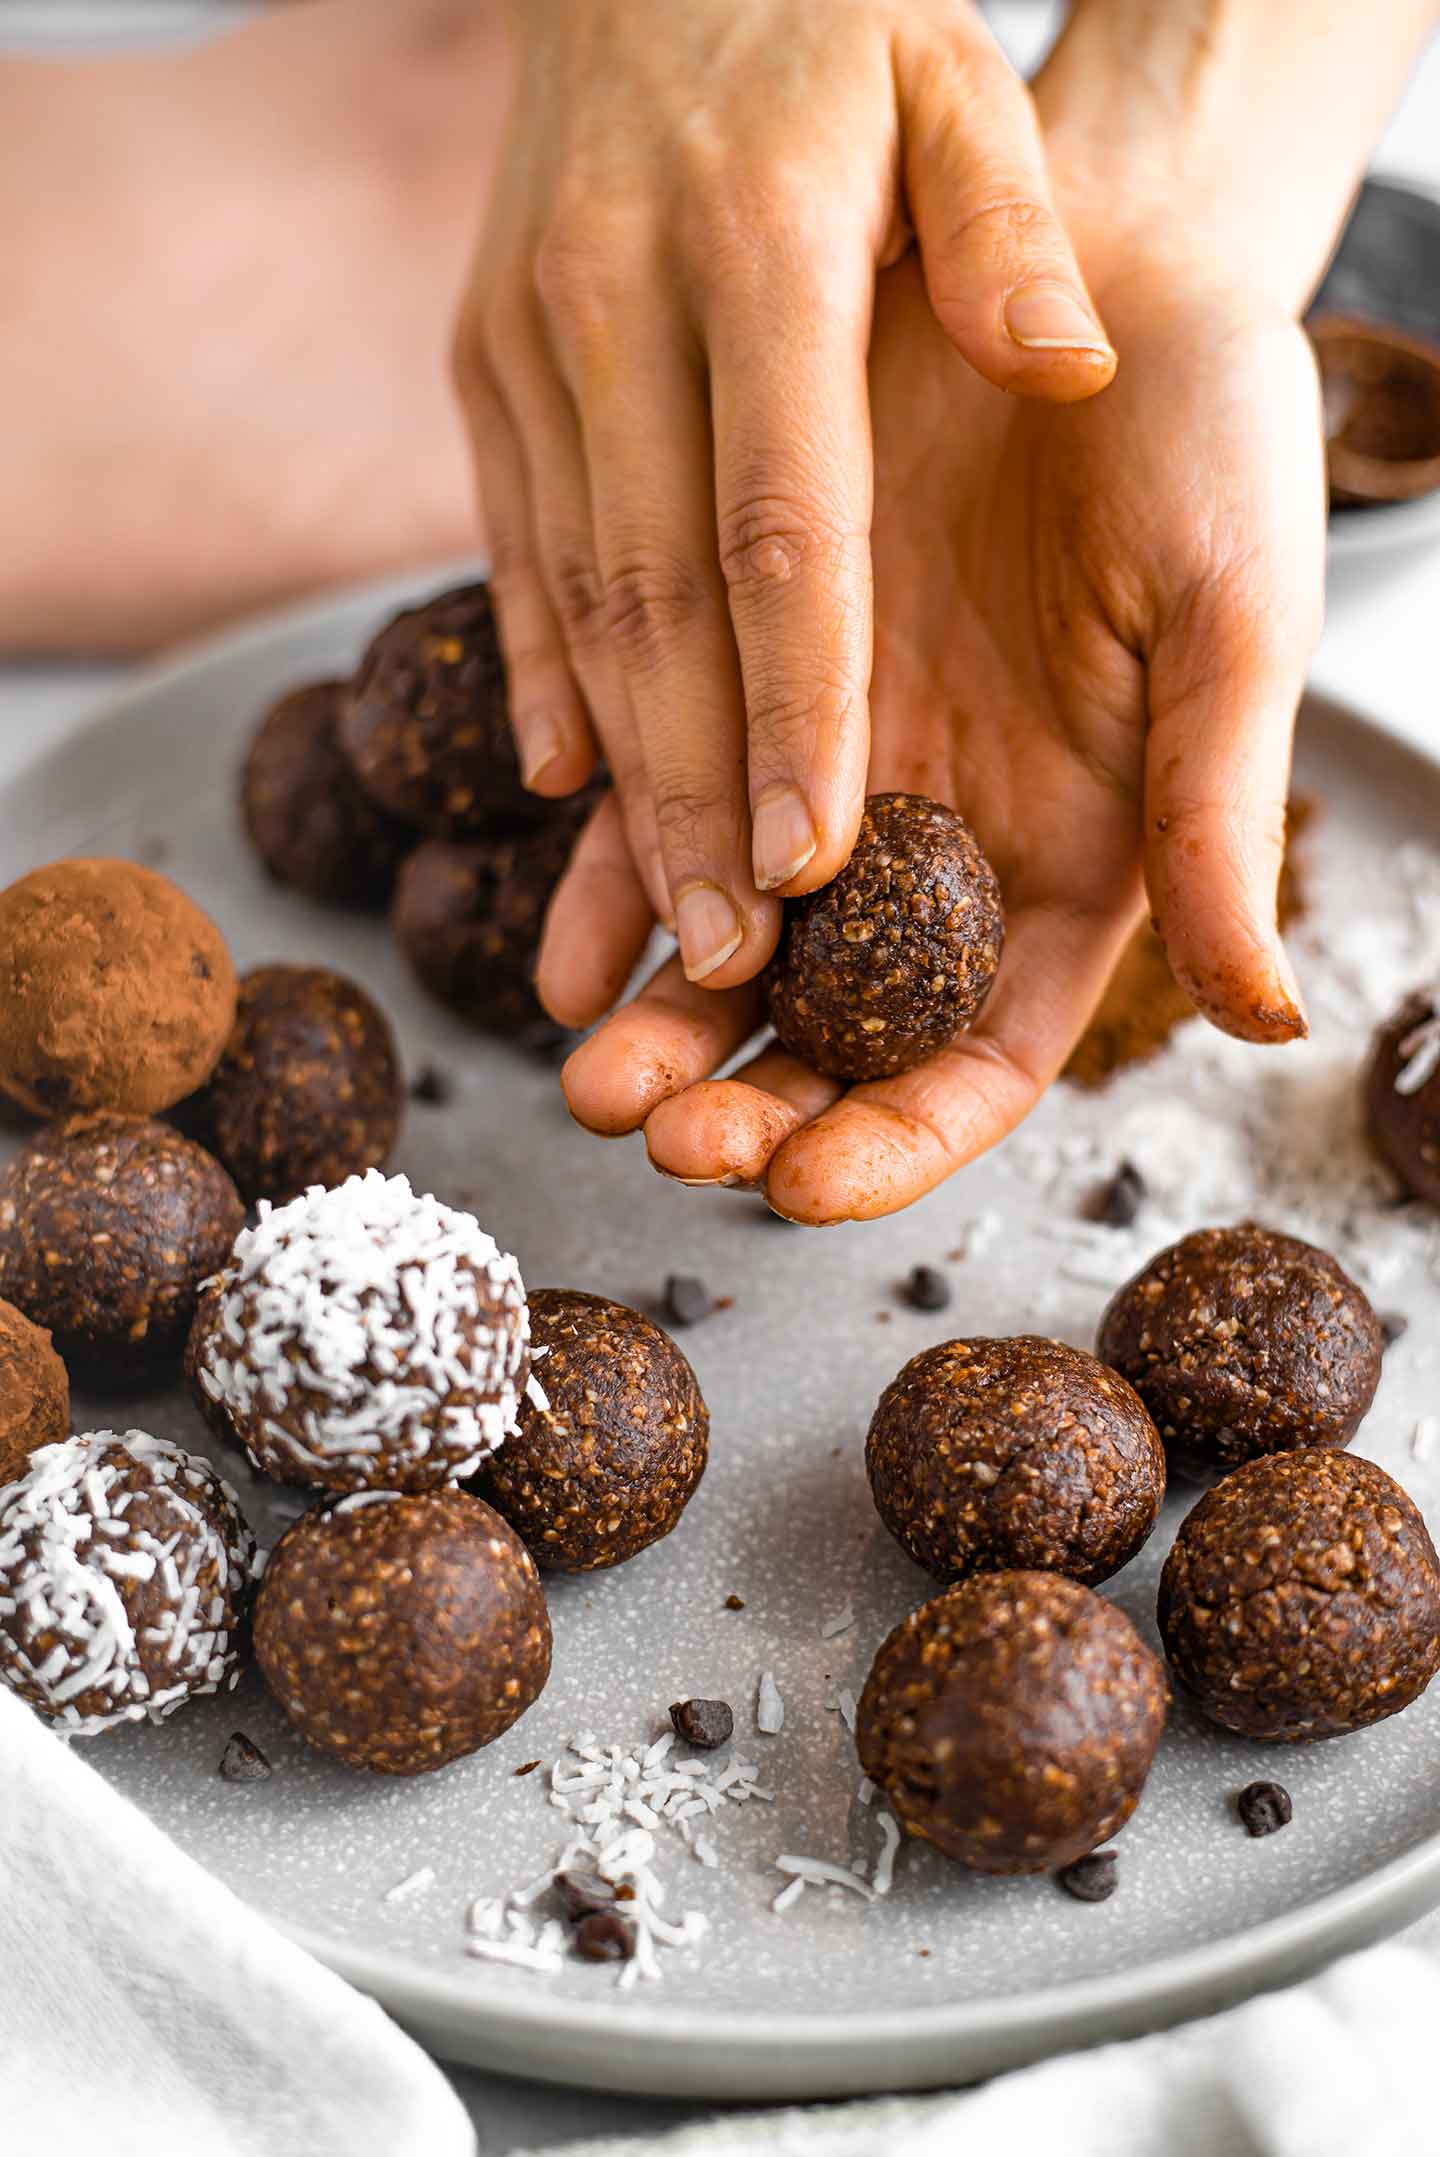 Close up of hands rolling a no bake energy ball. Formed balls lay on a plate. Some have been rolled in coconut flakes or additional cocoa powder.